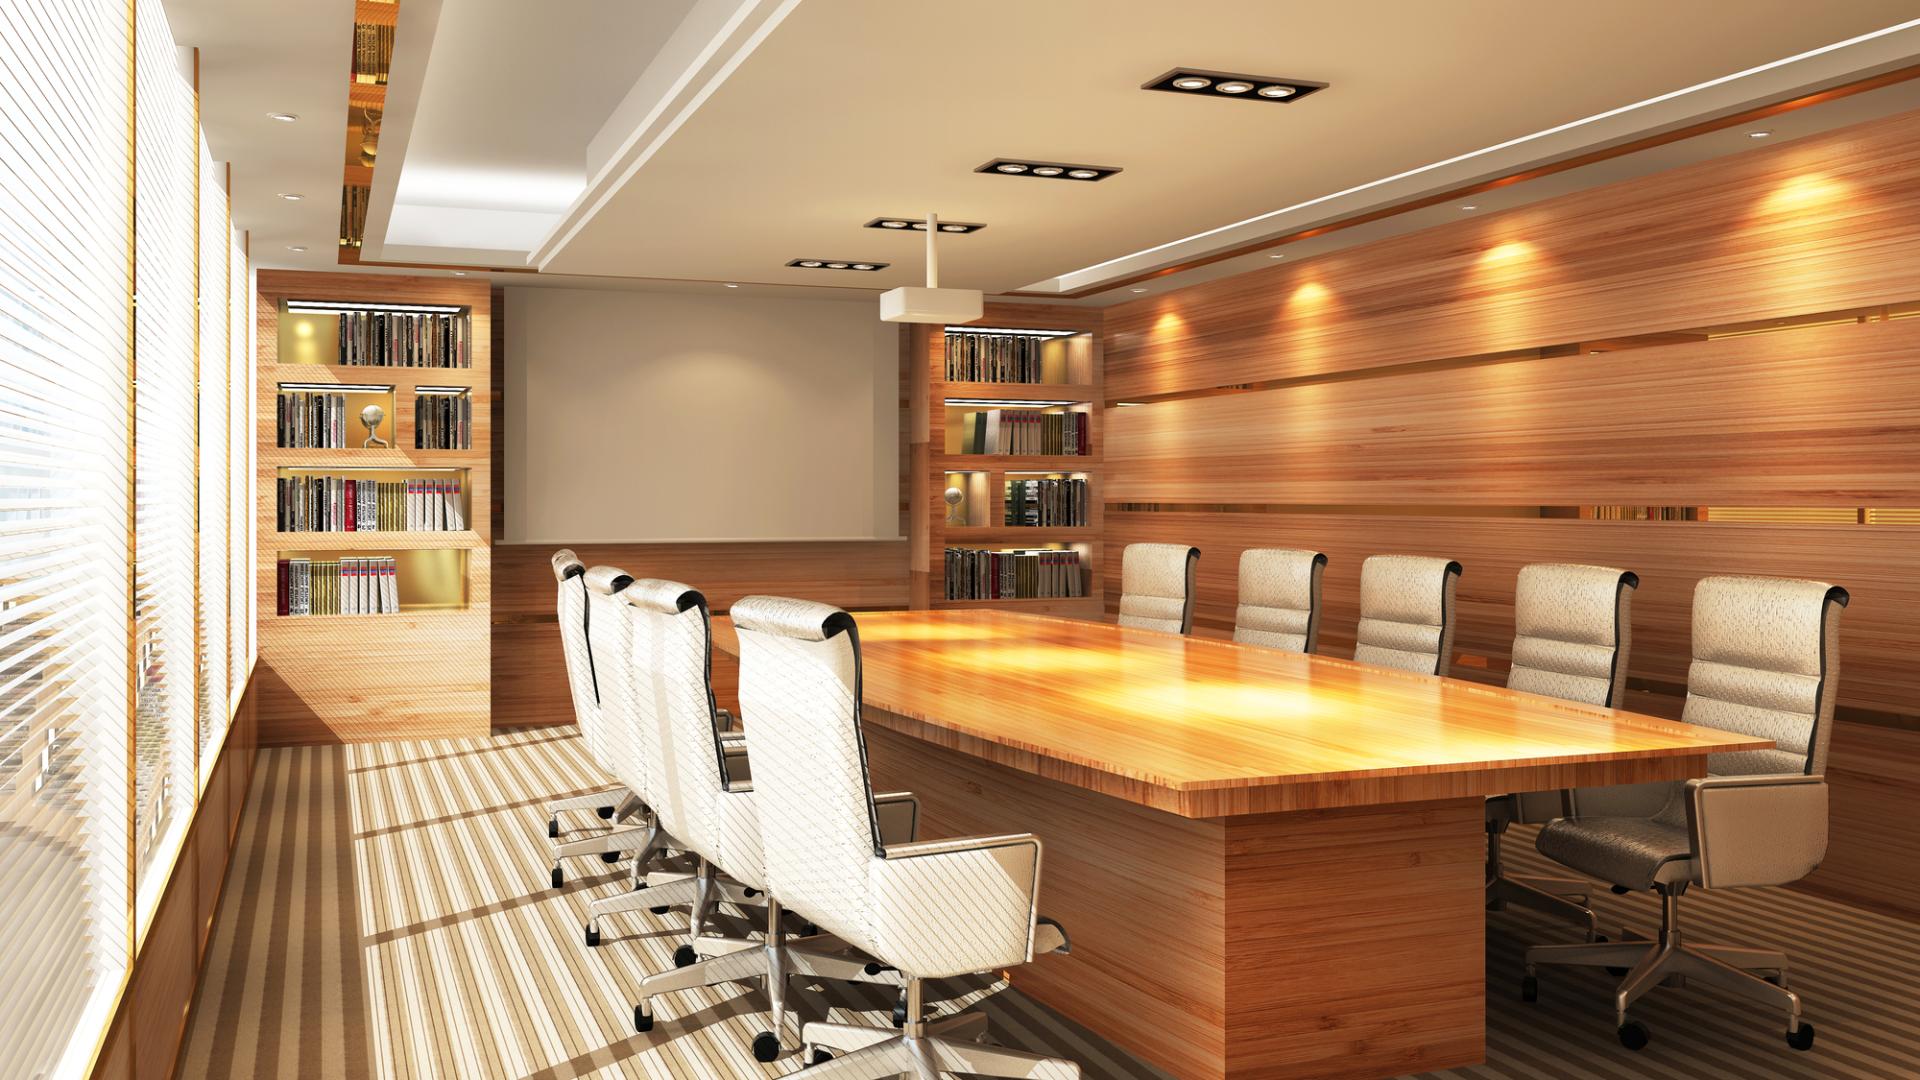 Meeting Rooms for Hire in Knightsbridge